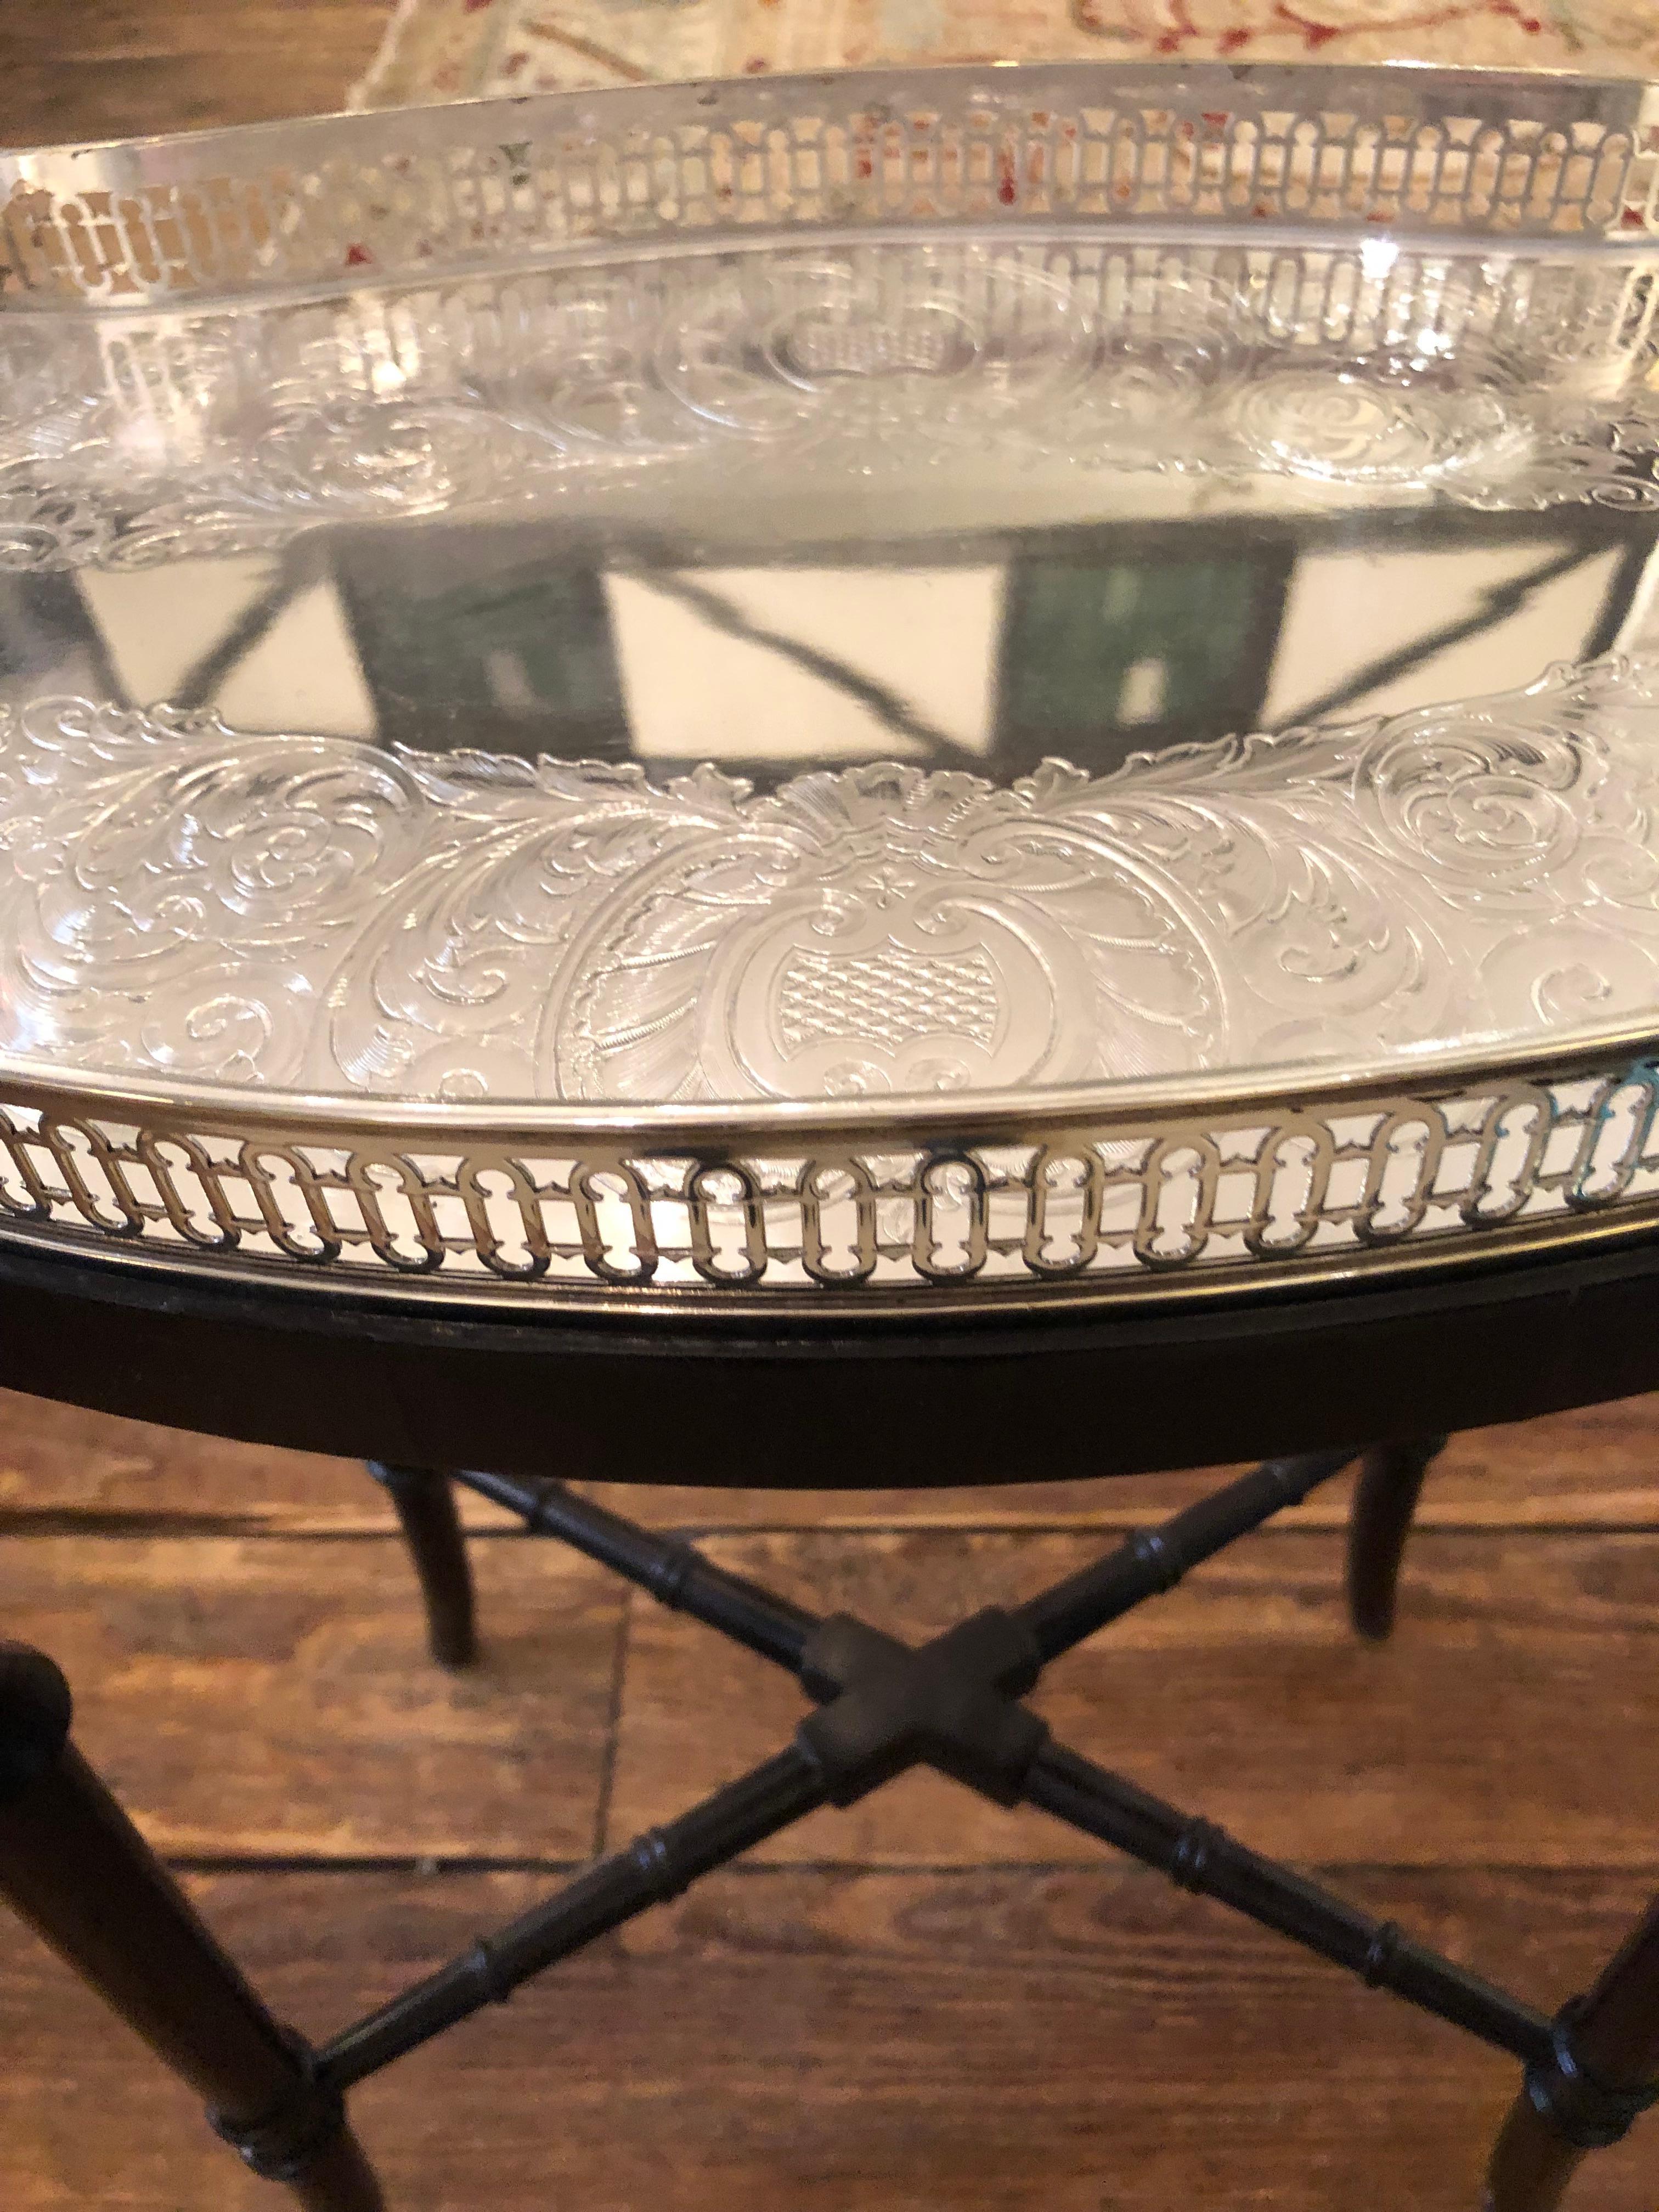 Elegant small end table, perfect for cocktails, having a black scalloped base by Nininger & Co., fitted perfectly with a gorgeous etched silver plate removable tray.